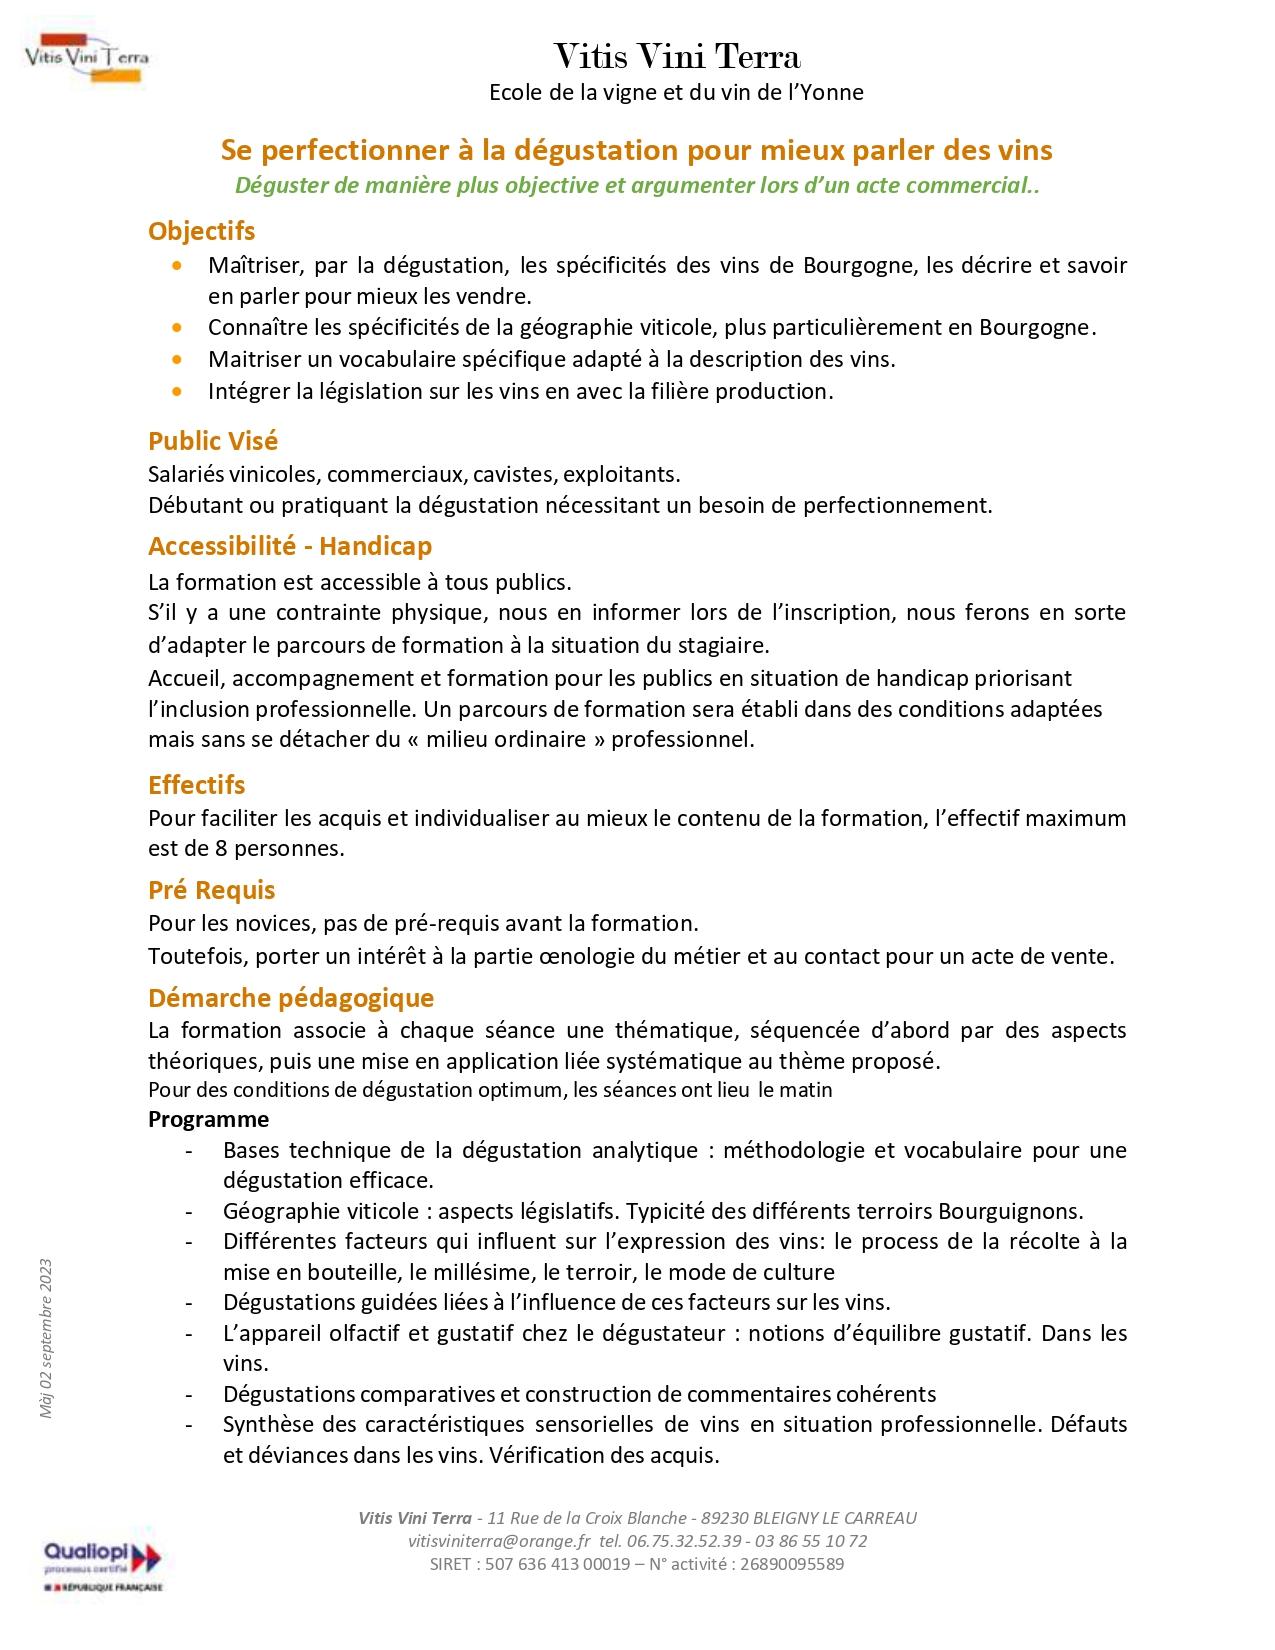 Fiche formation ip degustation page 0001